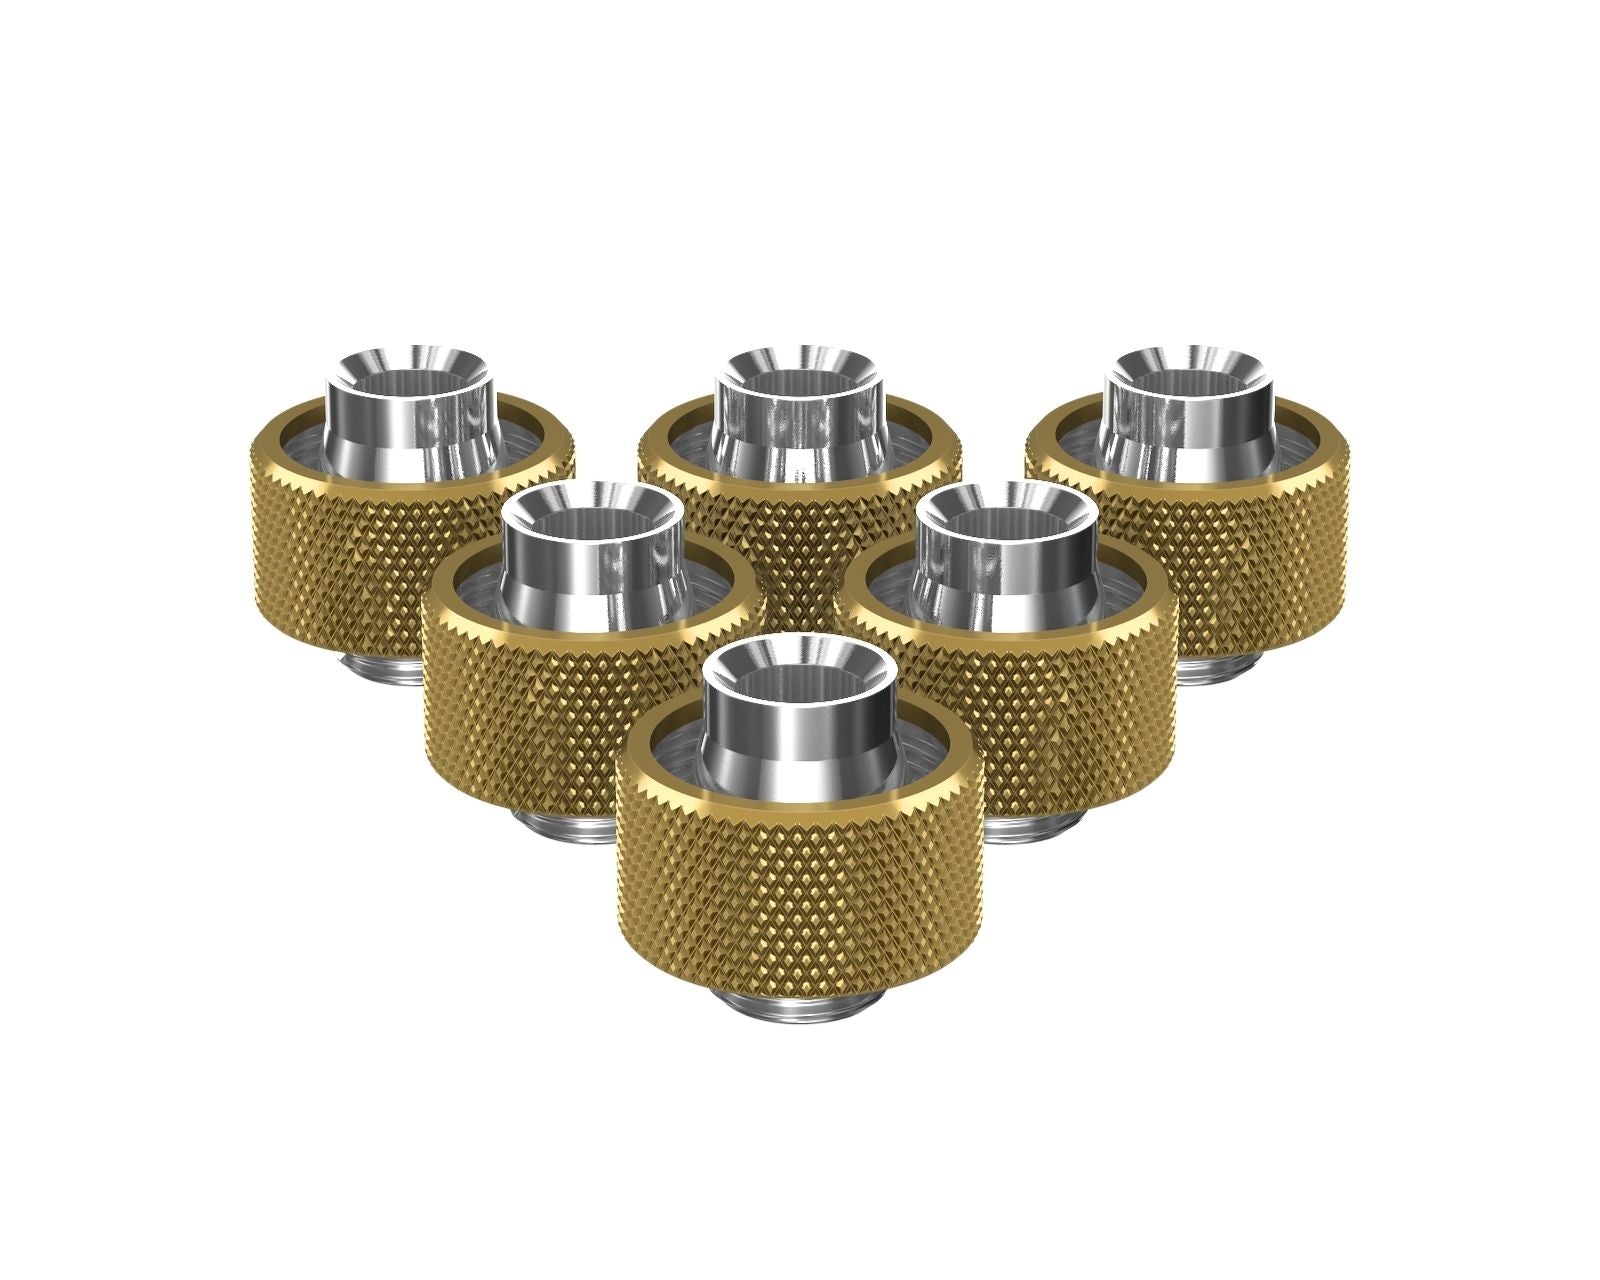 PrimoChill SecureFit SX - Premium Compression Fittings 6 Pack - For 1/2in ID x 3/4in OD Flexible Tubing (F-SFSX34-6) - Available in 20+ Colors, Custom Watercooling Loop Ready - Candy Gold